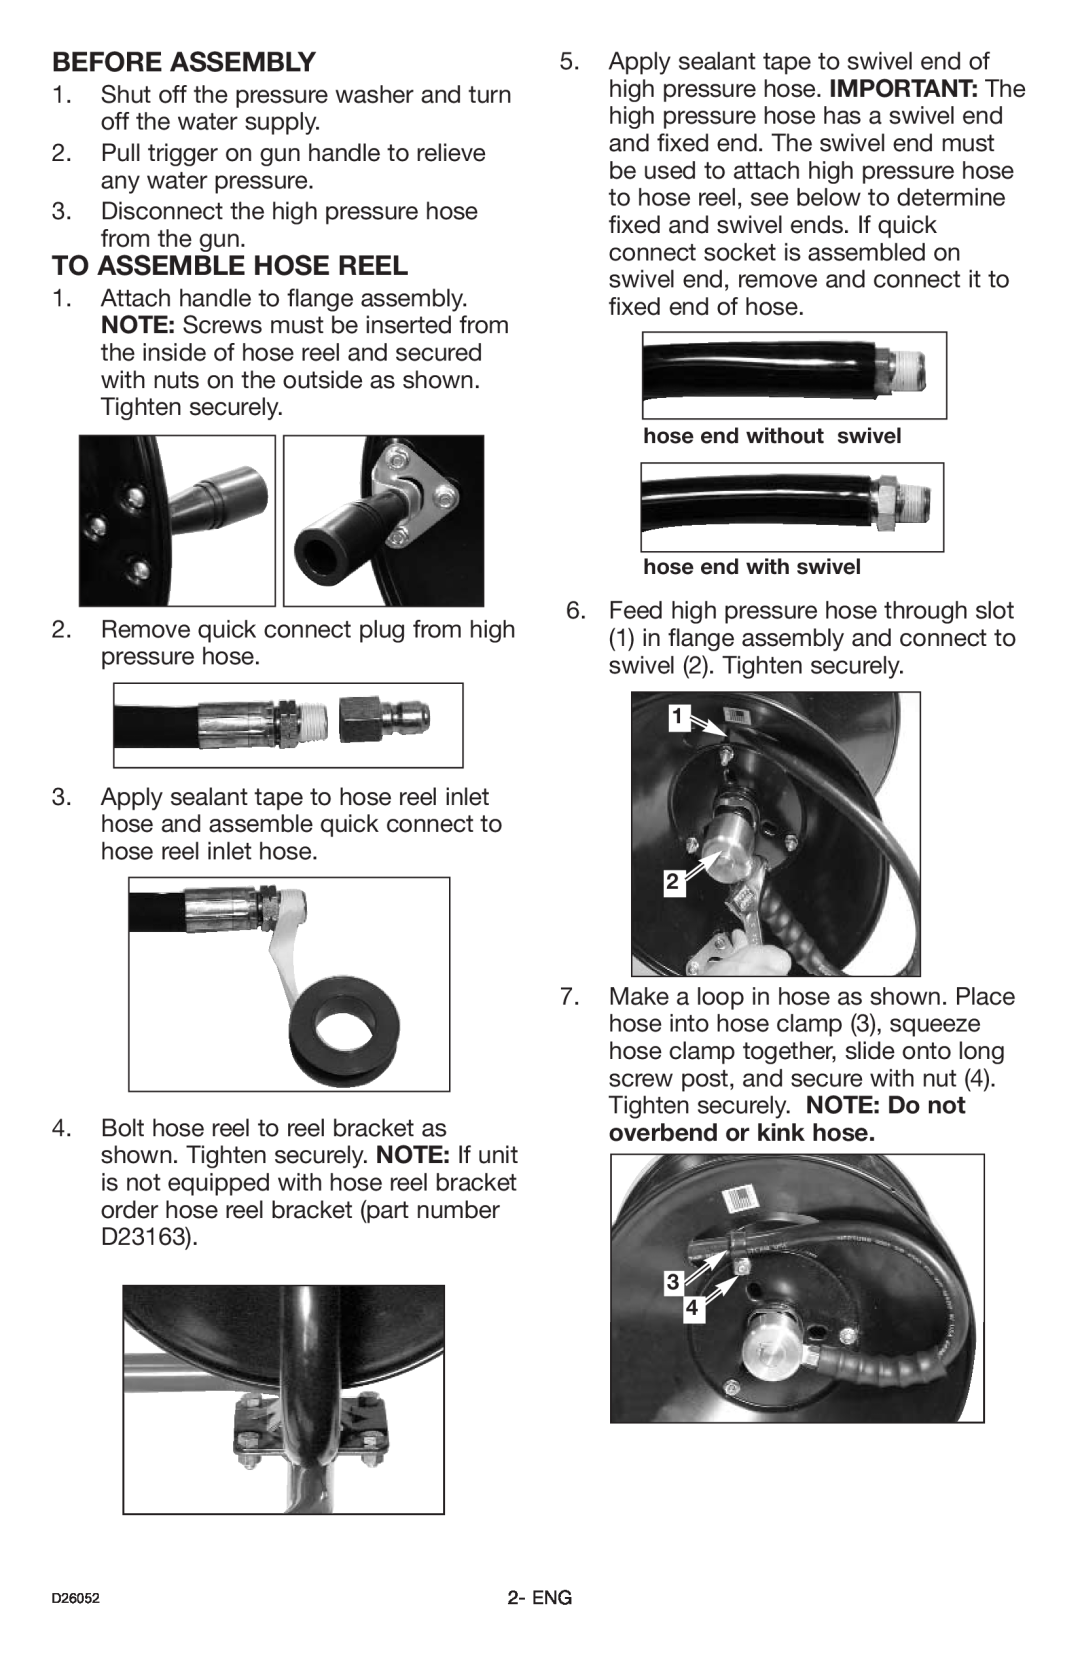 Porter-Cable PCA390, D26052-023-0 instruction manual Before Assembly, To Assemble Hose Reel 